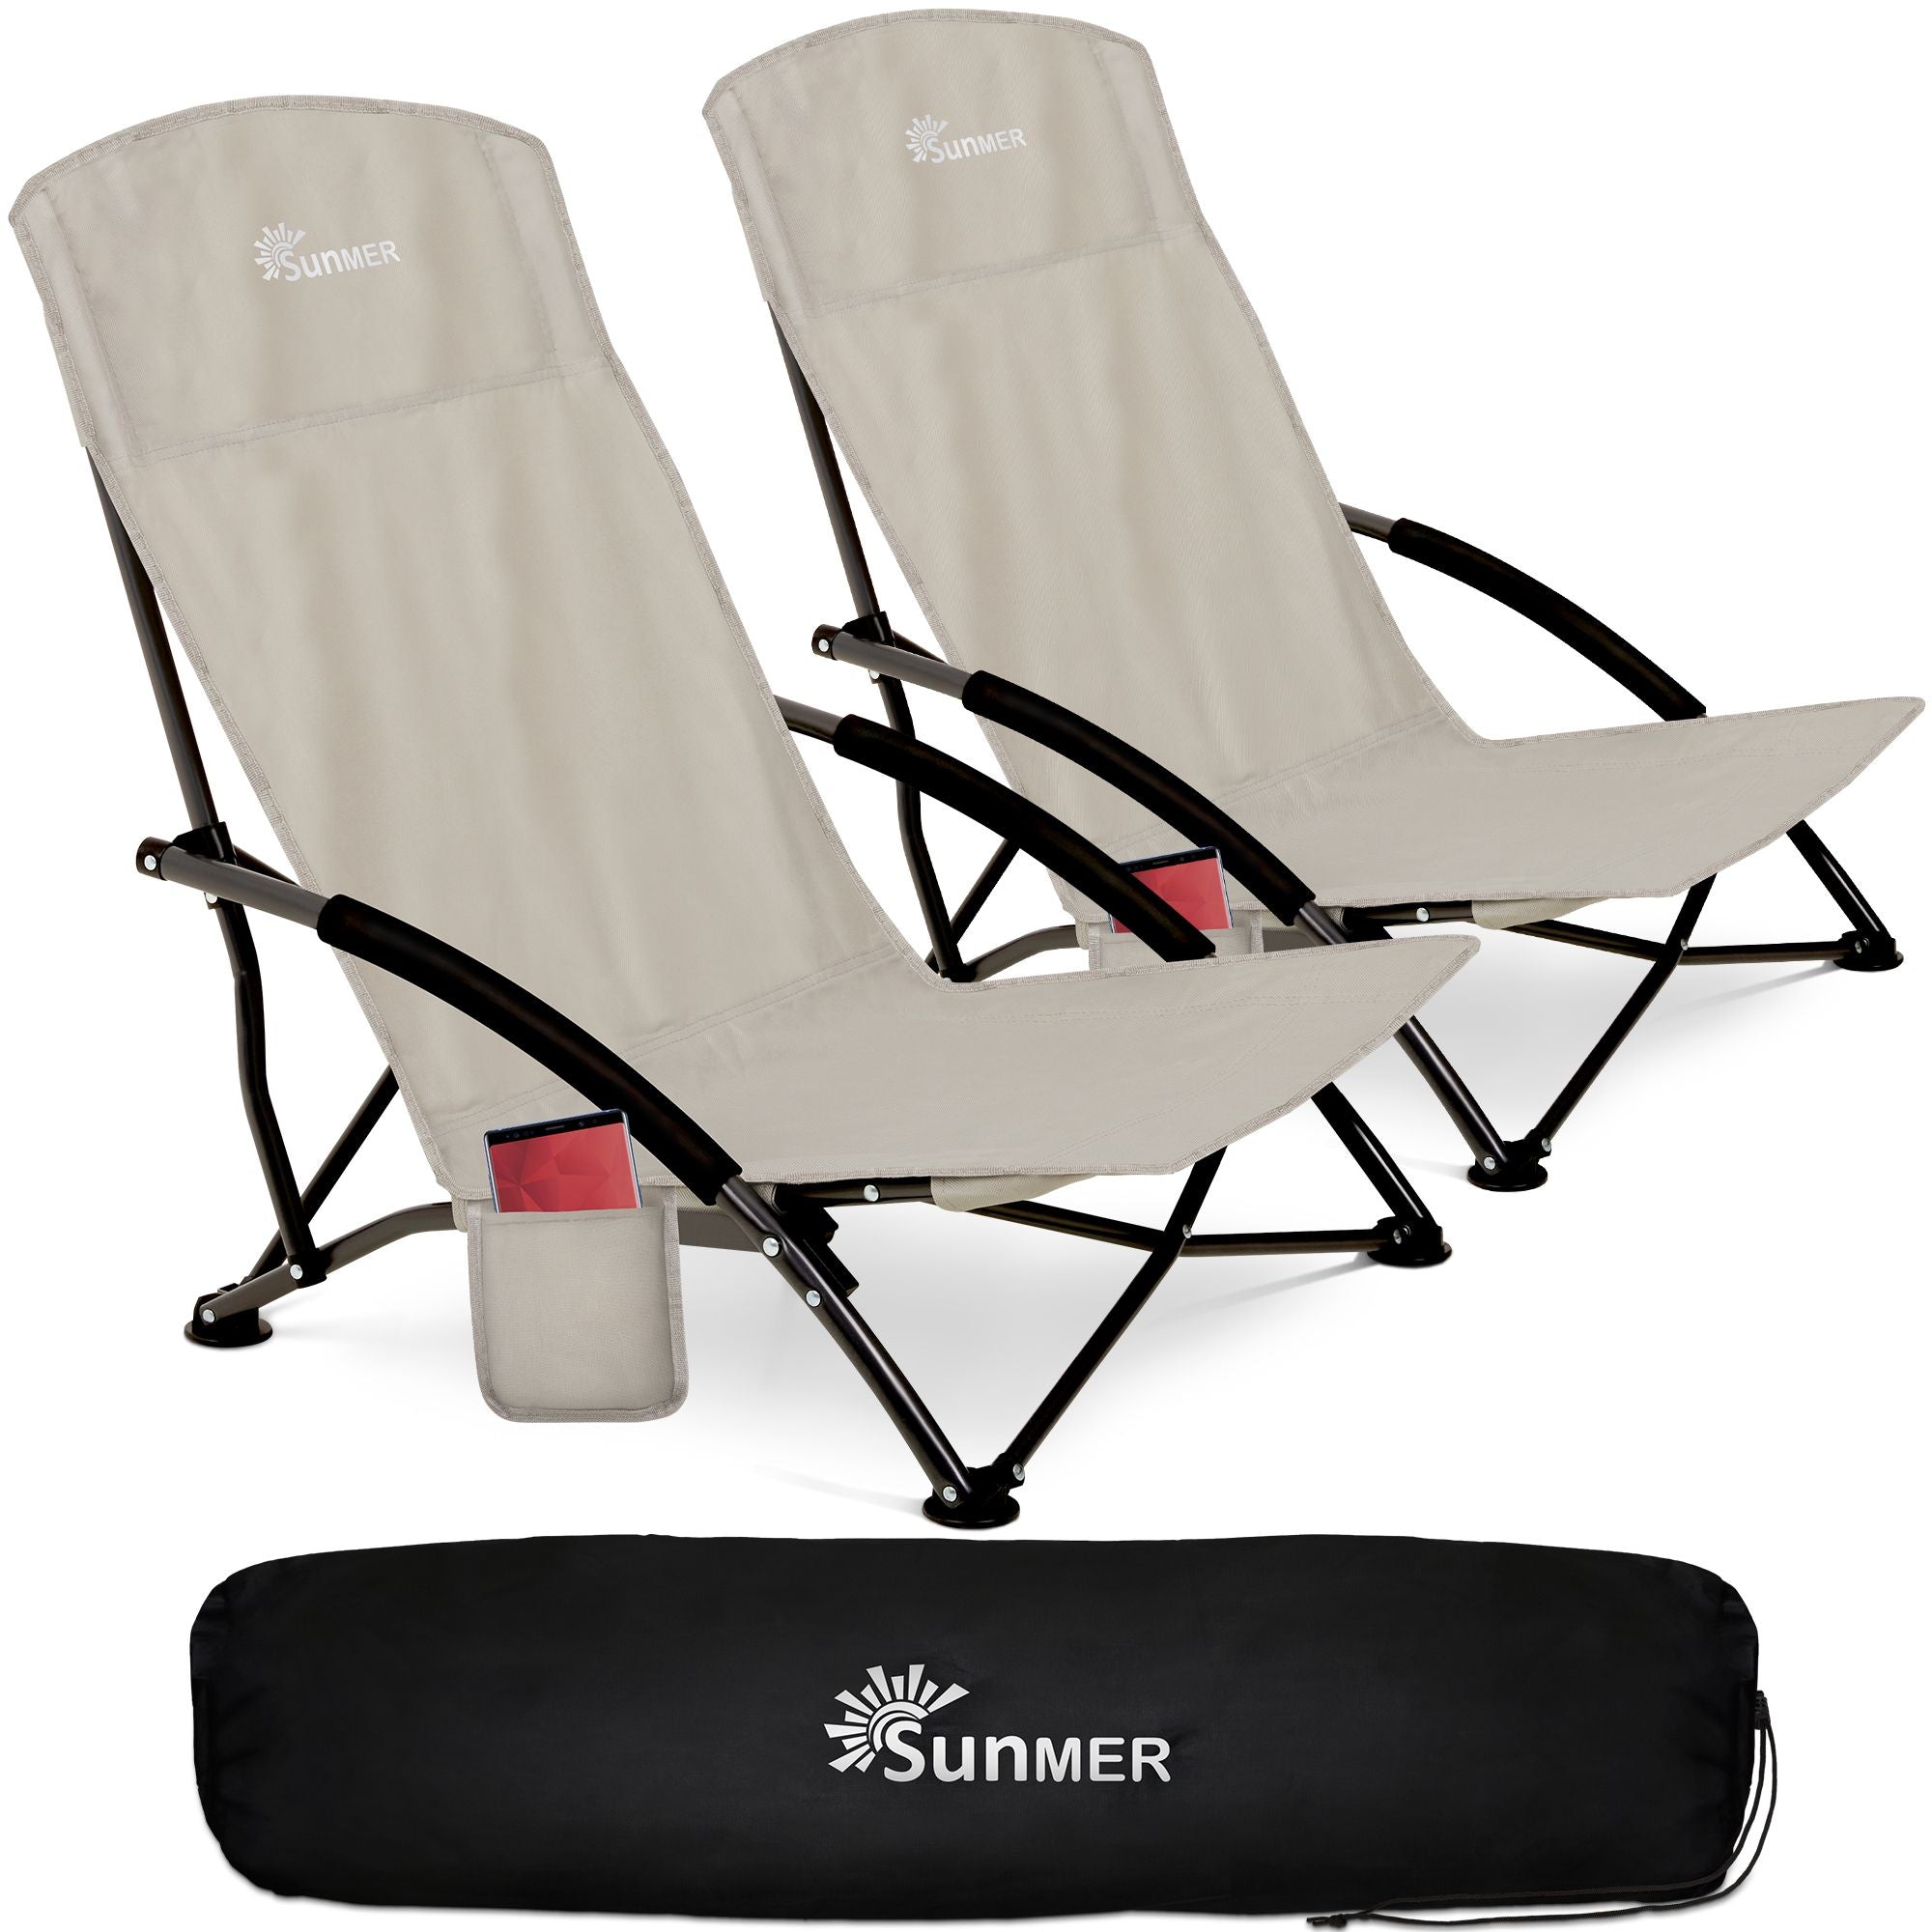 SUNMER Set of 2 Folding Beach Chair with Side Pocket & Carry Bag - Grey